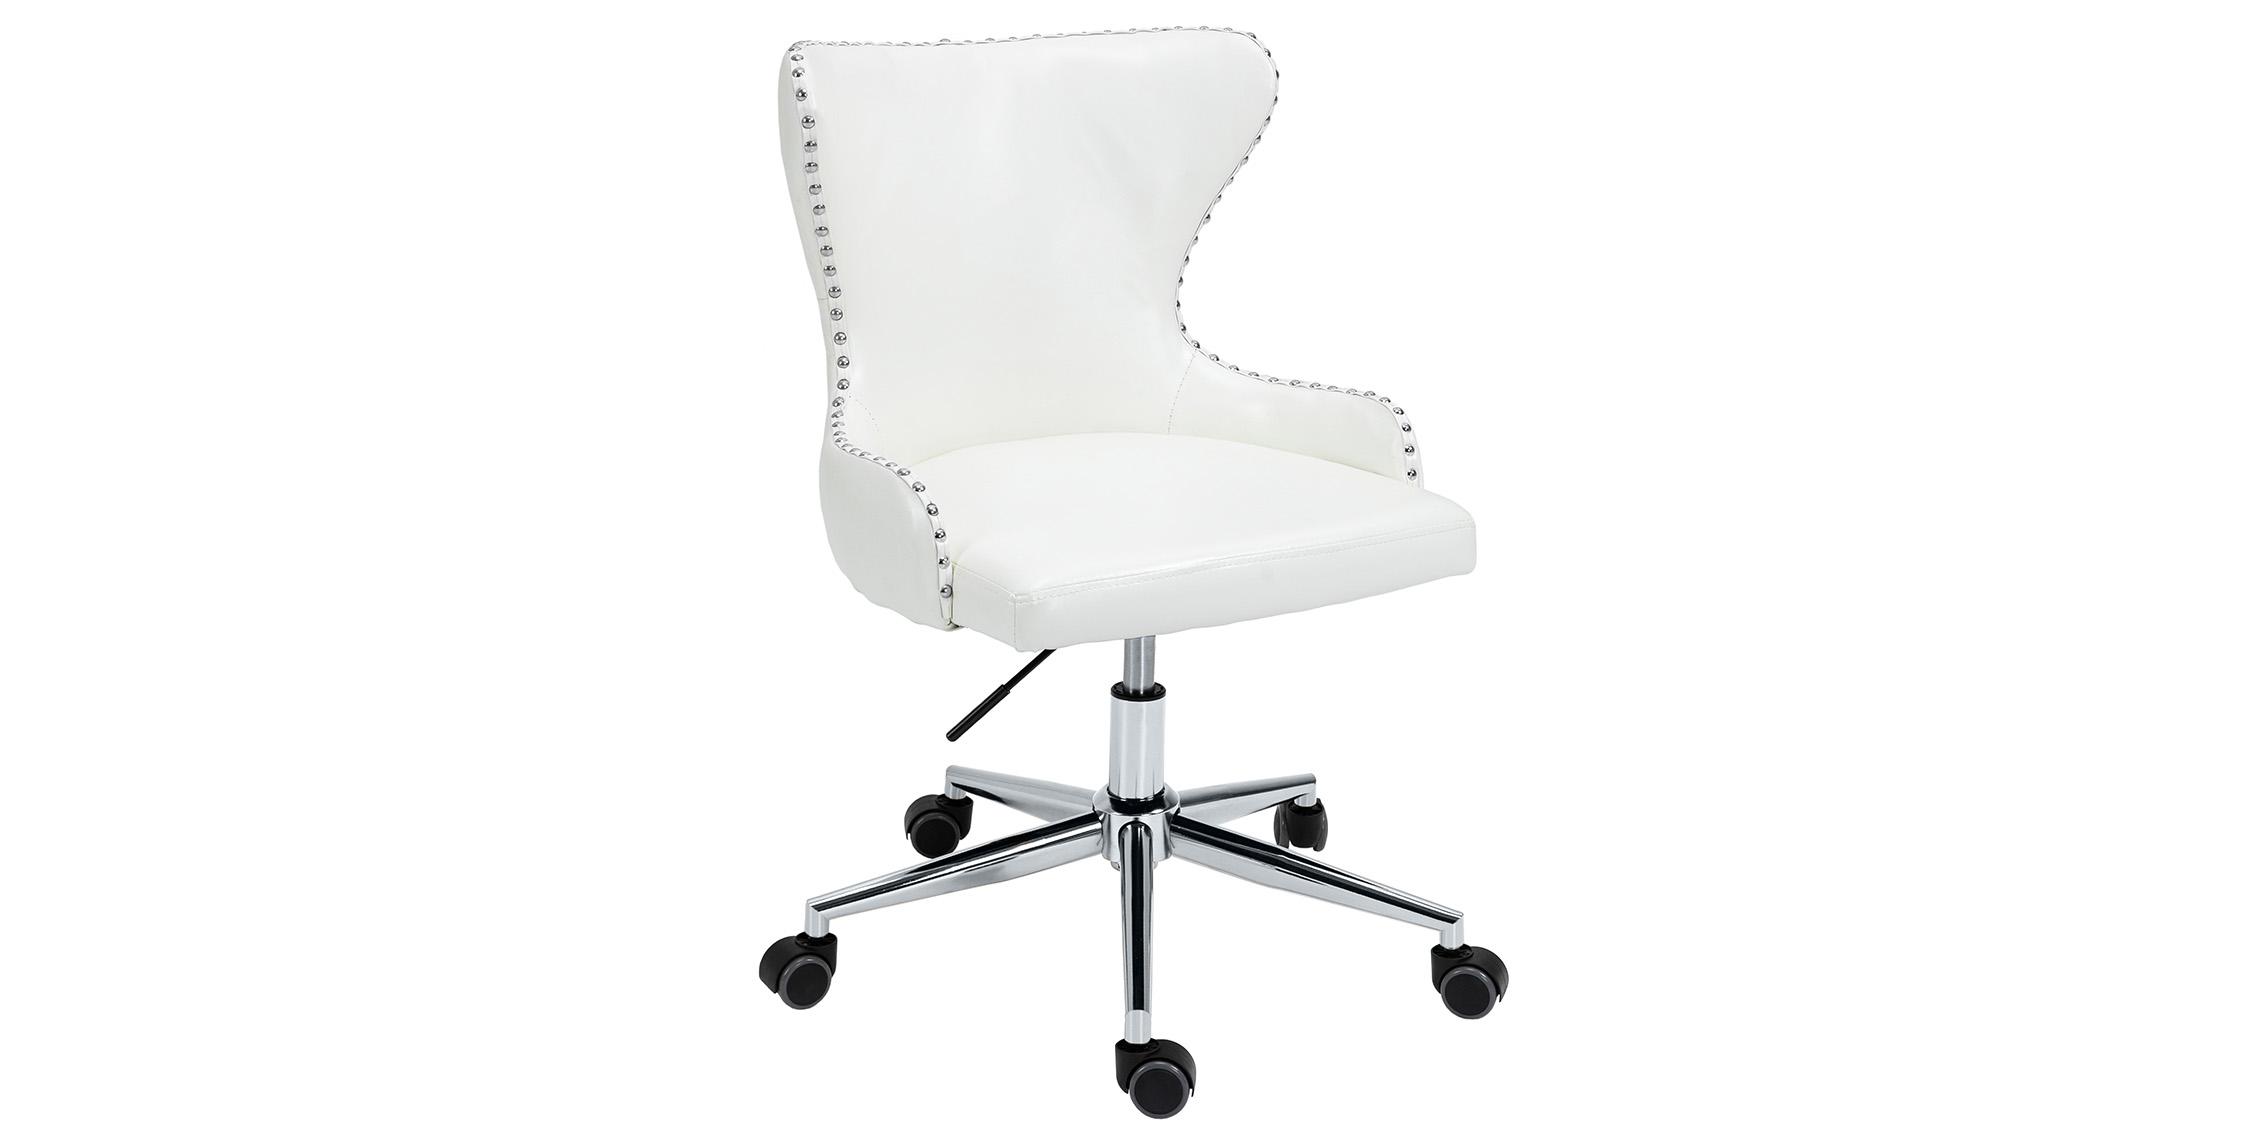 Contemporary, Modern Office Chair HENDRIX 168White 168White in Chrome, White Faux Leather